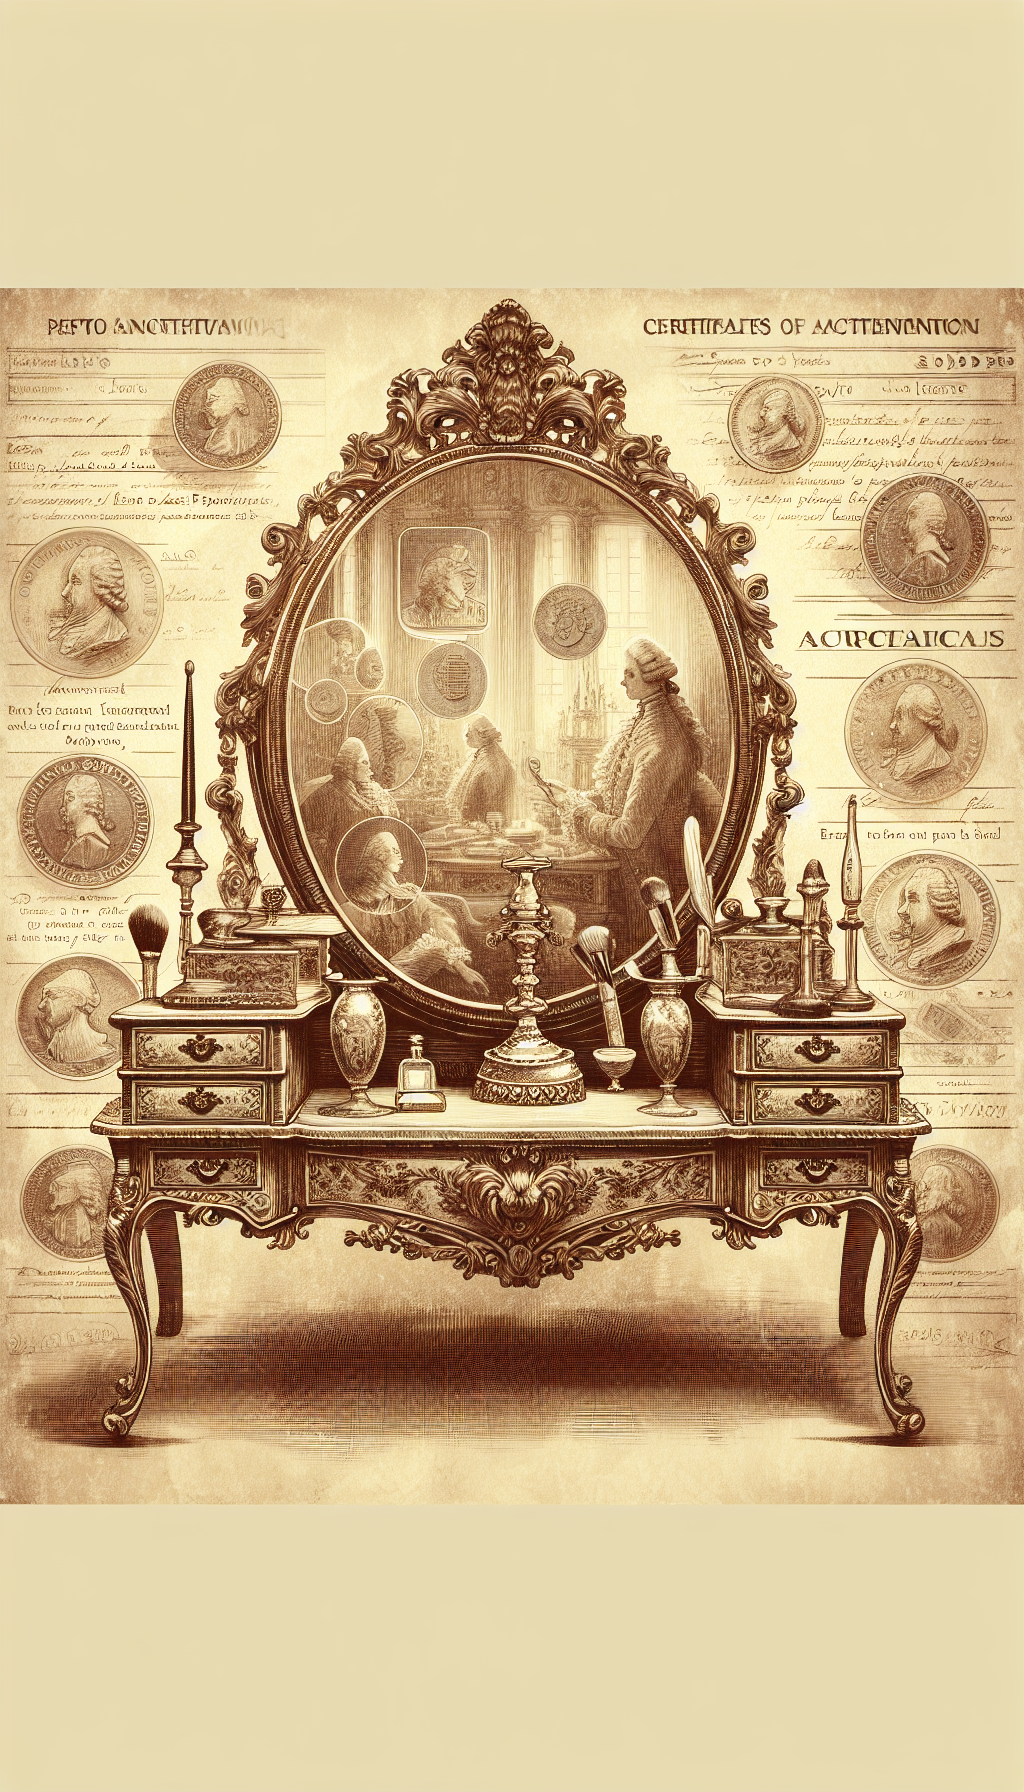 A sepia-toned illustration depicts an ornate antique vanity with a gilded mirror reflecting a collage of historical vignettes—aristocrats applying perfume, ancient auctions, and certificates of authenticity—superimposed with translucent currency symbols, conveying the vanity's rich provenance and esteemed value through the ages. Each timeframe is rendered in a distinct art style, from baroque to impressionism.